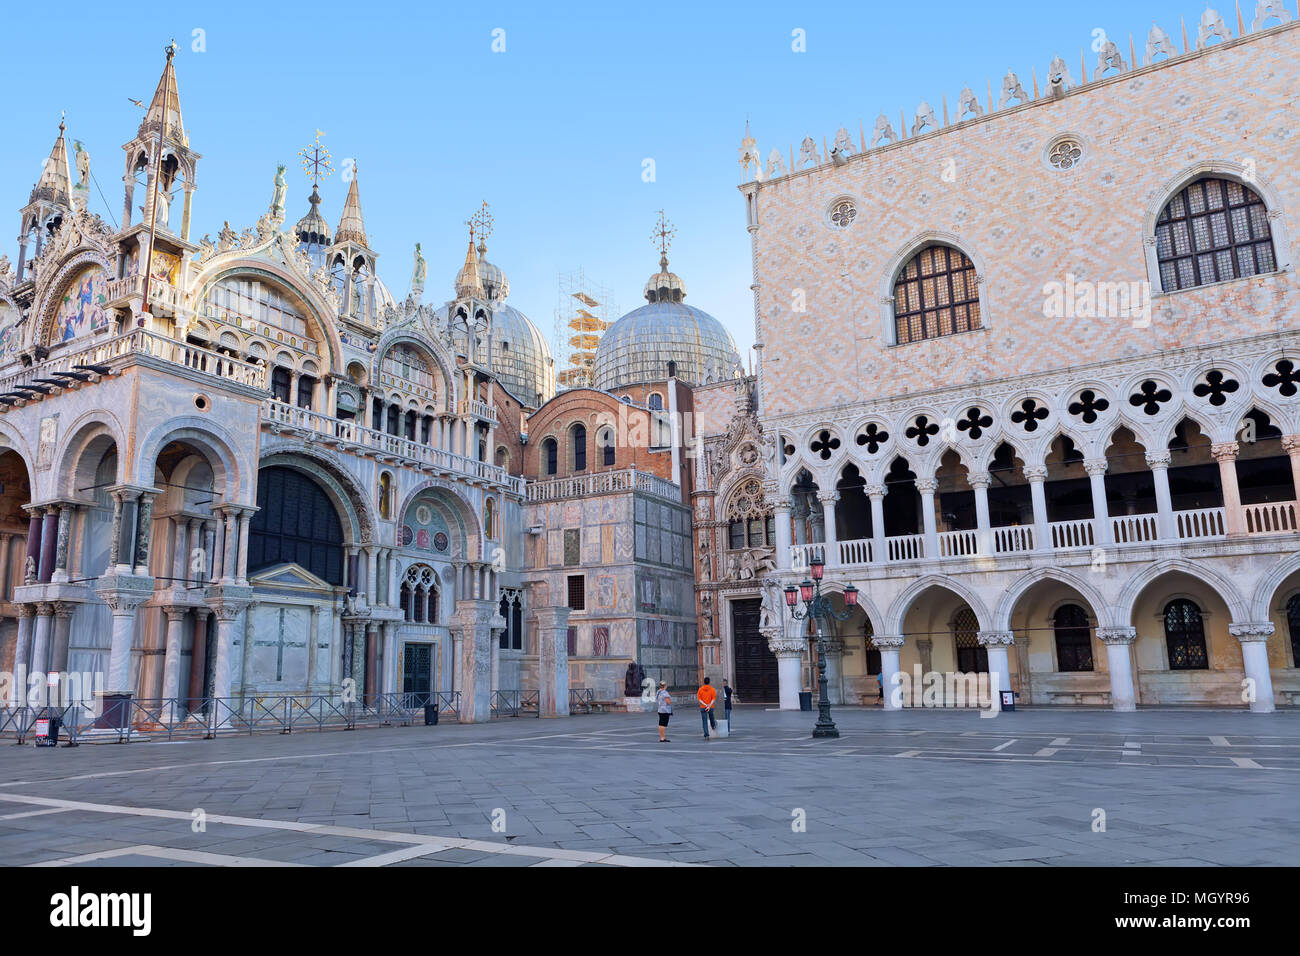 The St. Mark's Square (Piazza San Marco) with the Cathedral Basilica of Saint Mark and Doge's Palace. Venice, Italy Stock Photo